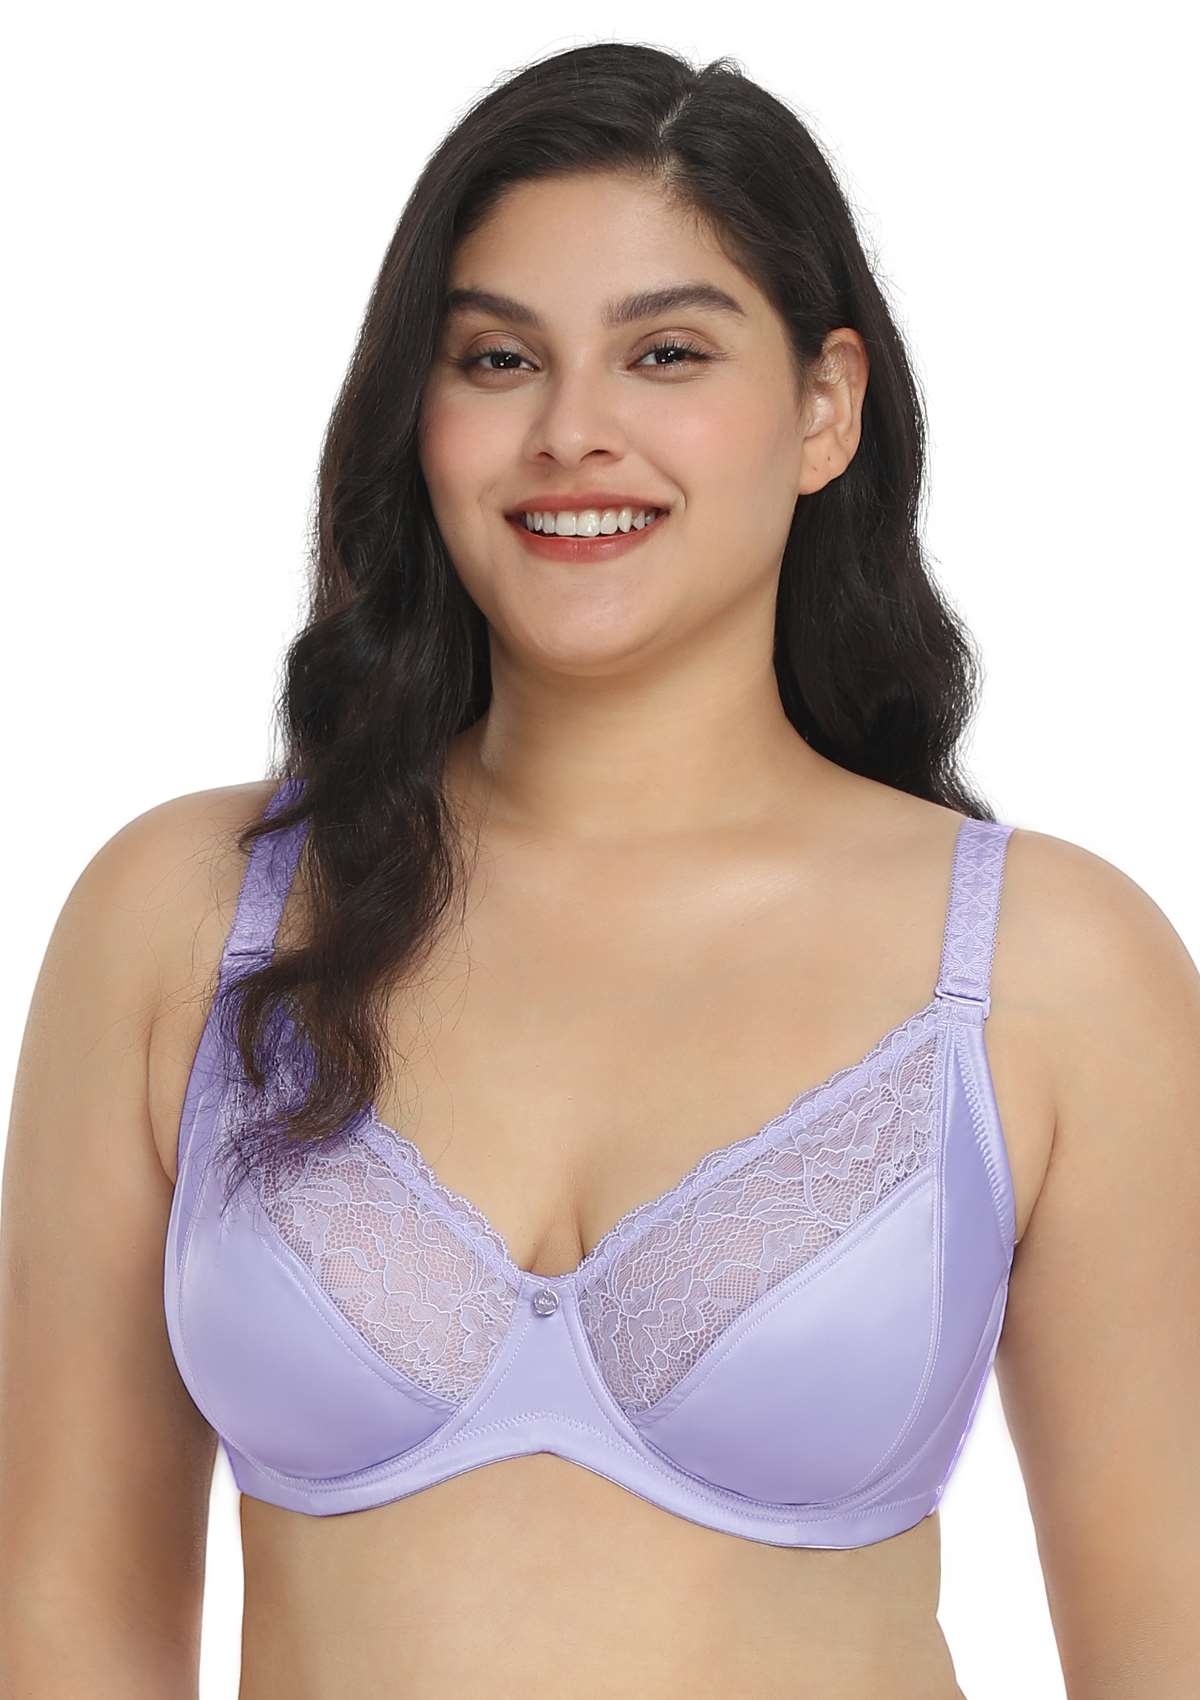 HSIA Foxy Satin Silky Full Coverage Underwire Bra With Floral Lace Trim - Champagne / 40 / C